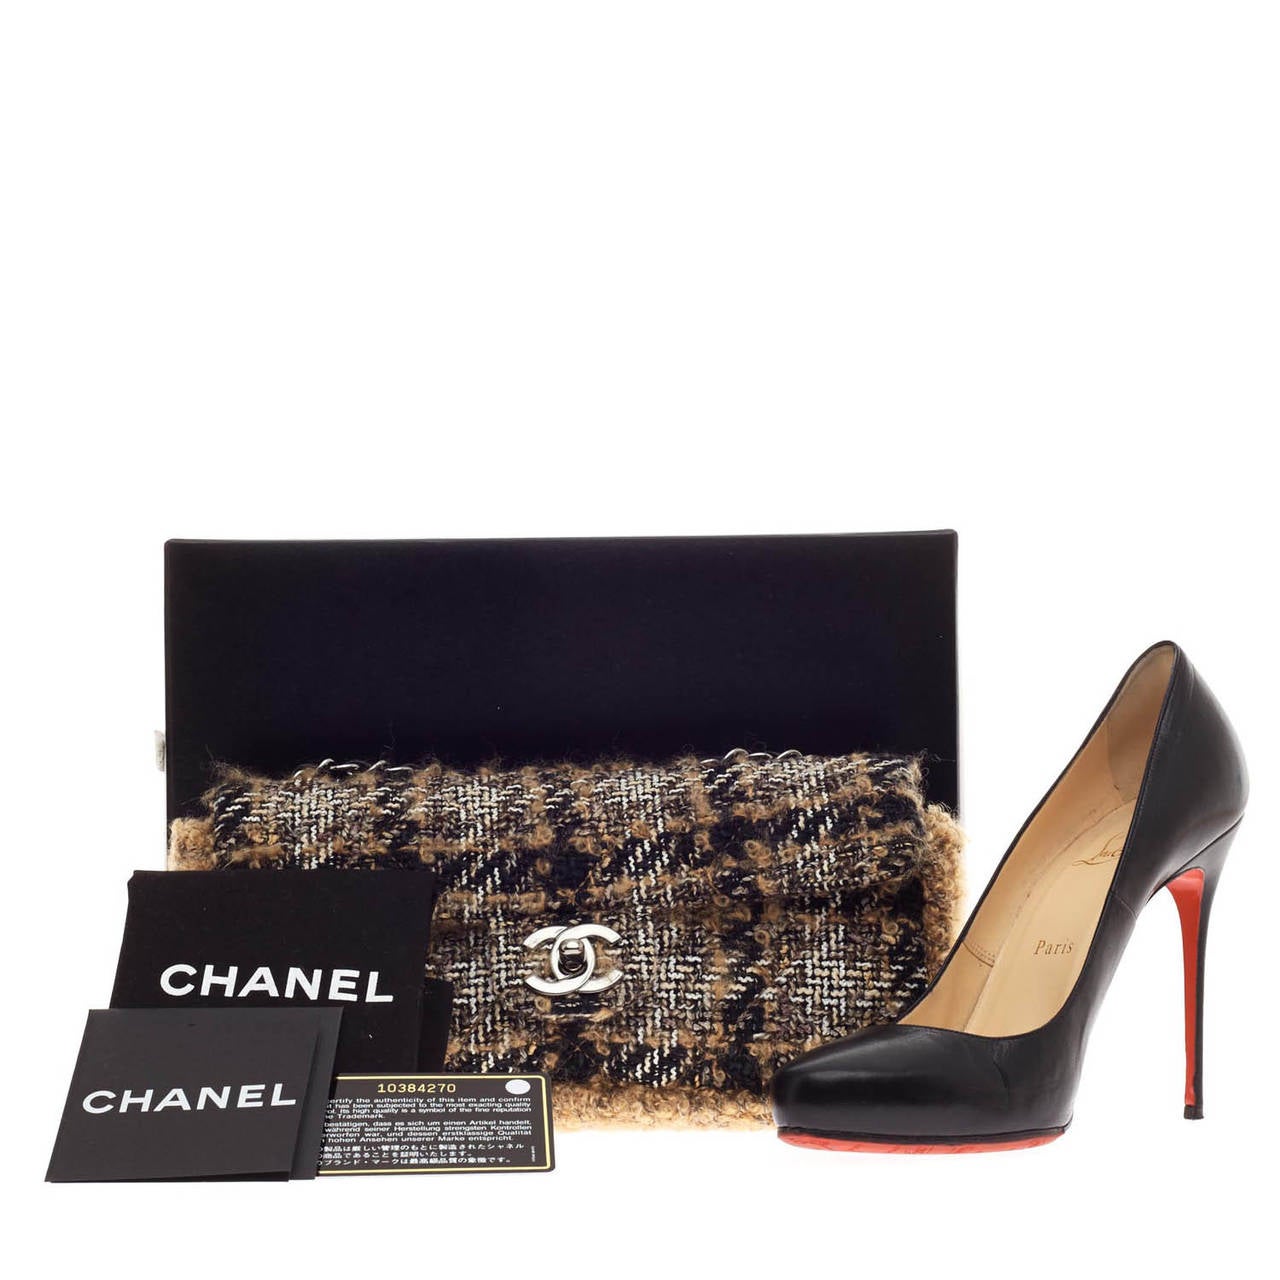 This authentic pre-owned Chanel Flap Bag Tweed in East West size is a callback to Coco Chanel's iconic Tweed pieces. Constructed with black, white, and tan woven bouclé tweed, this compact and petite bag is surrounded at the base with sandy